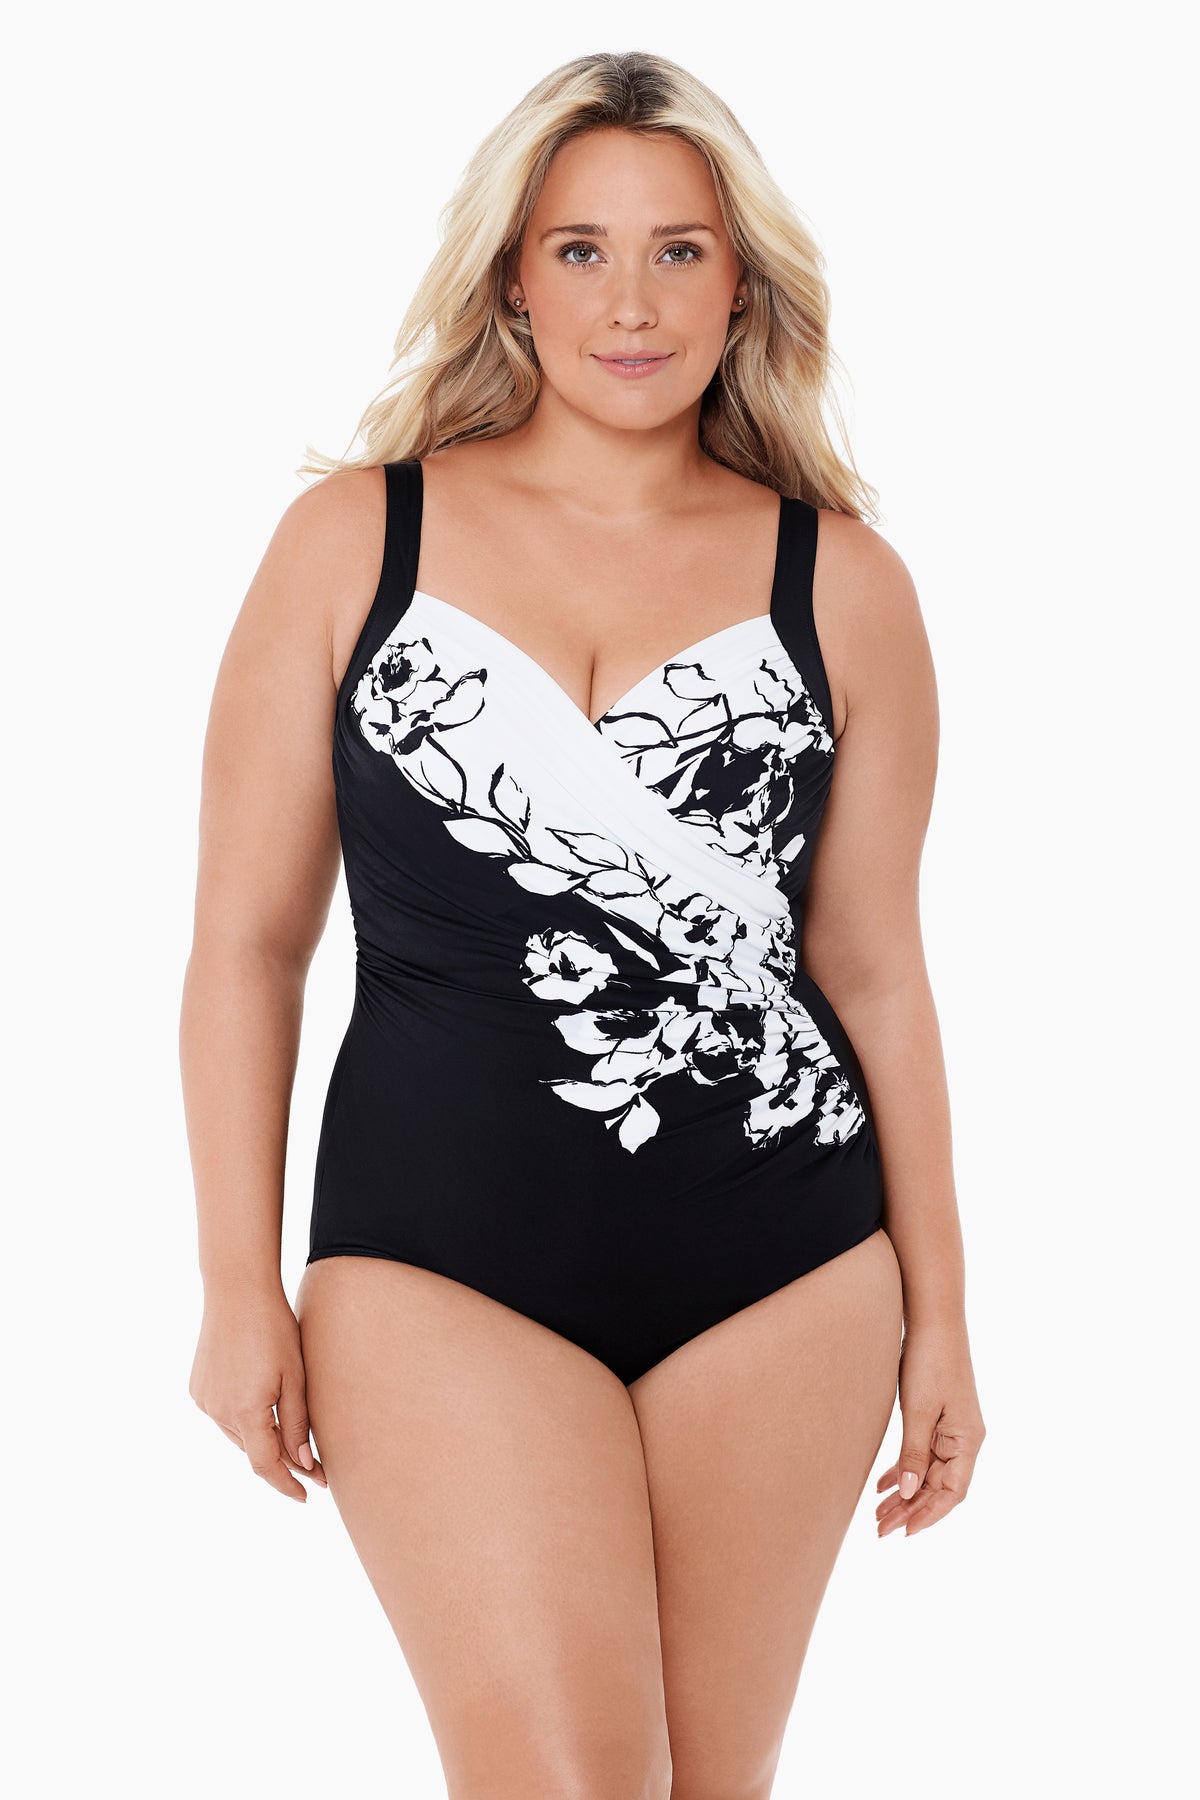 Inadays Plus Size One Piece Bathing Suit for Women Sexy Tummy